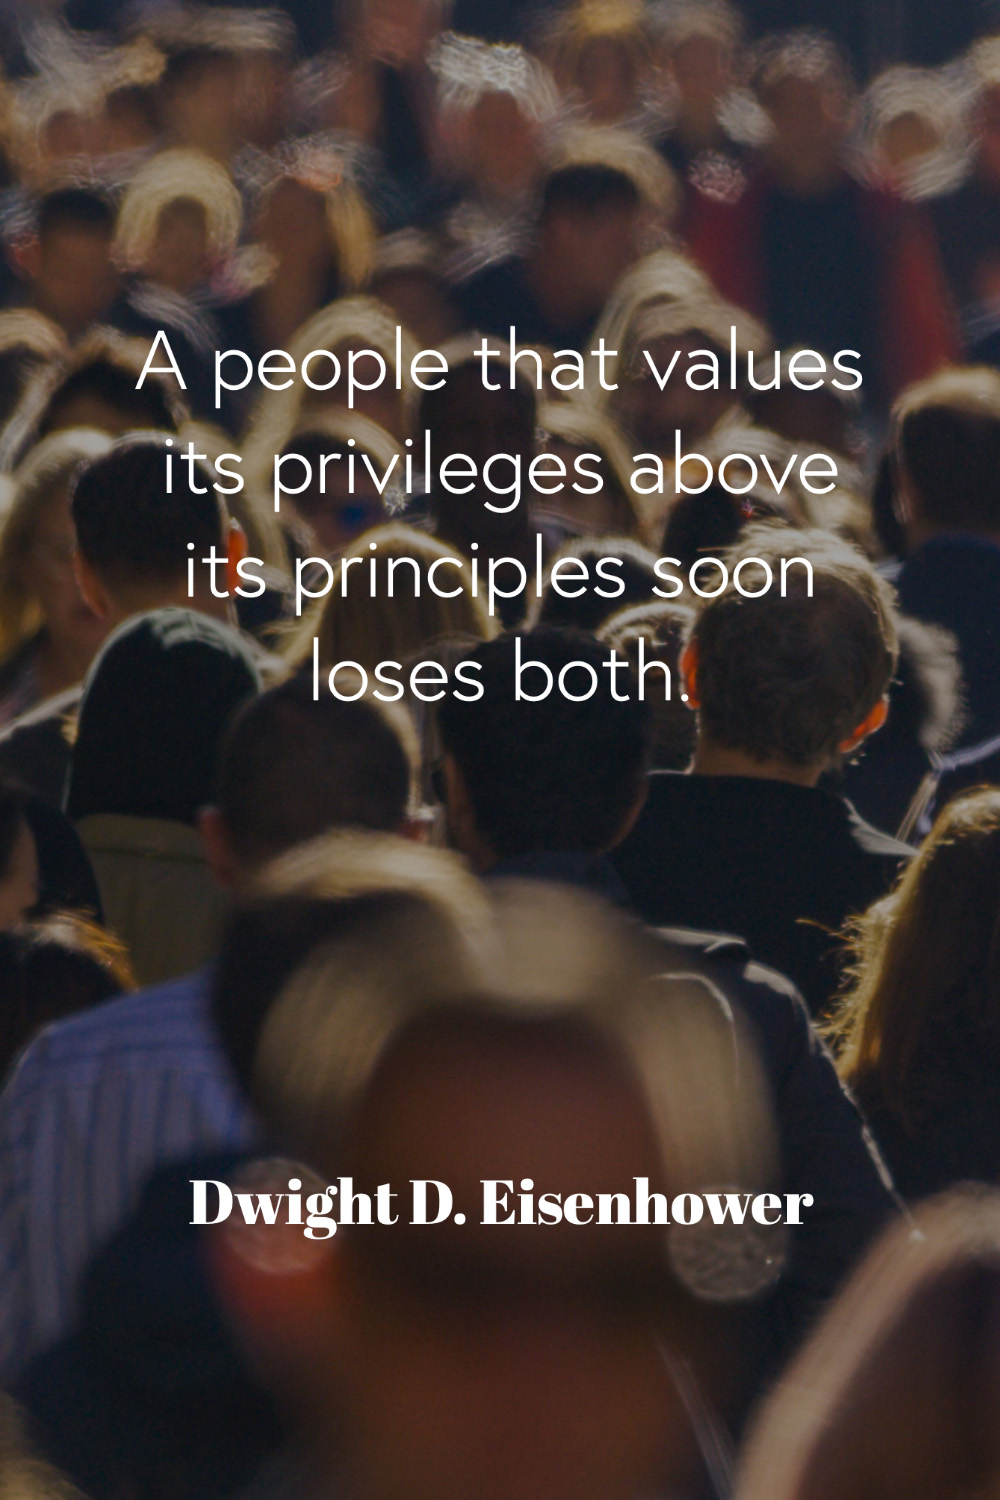 Quote by Dwight D. Eisenhower